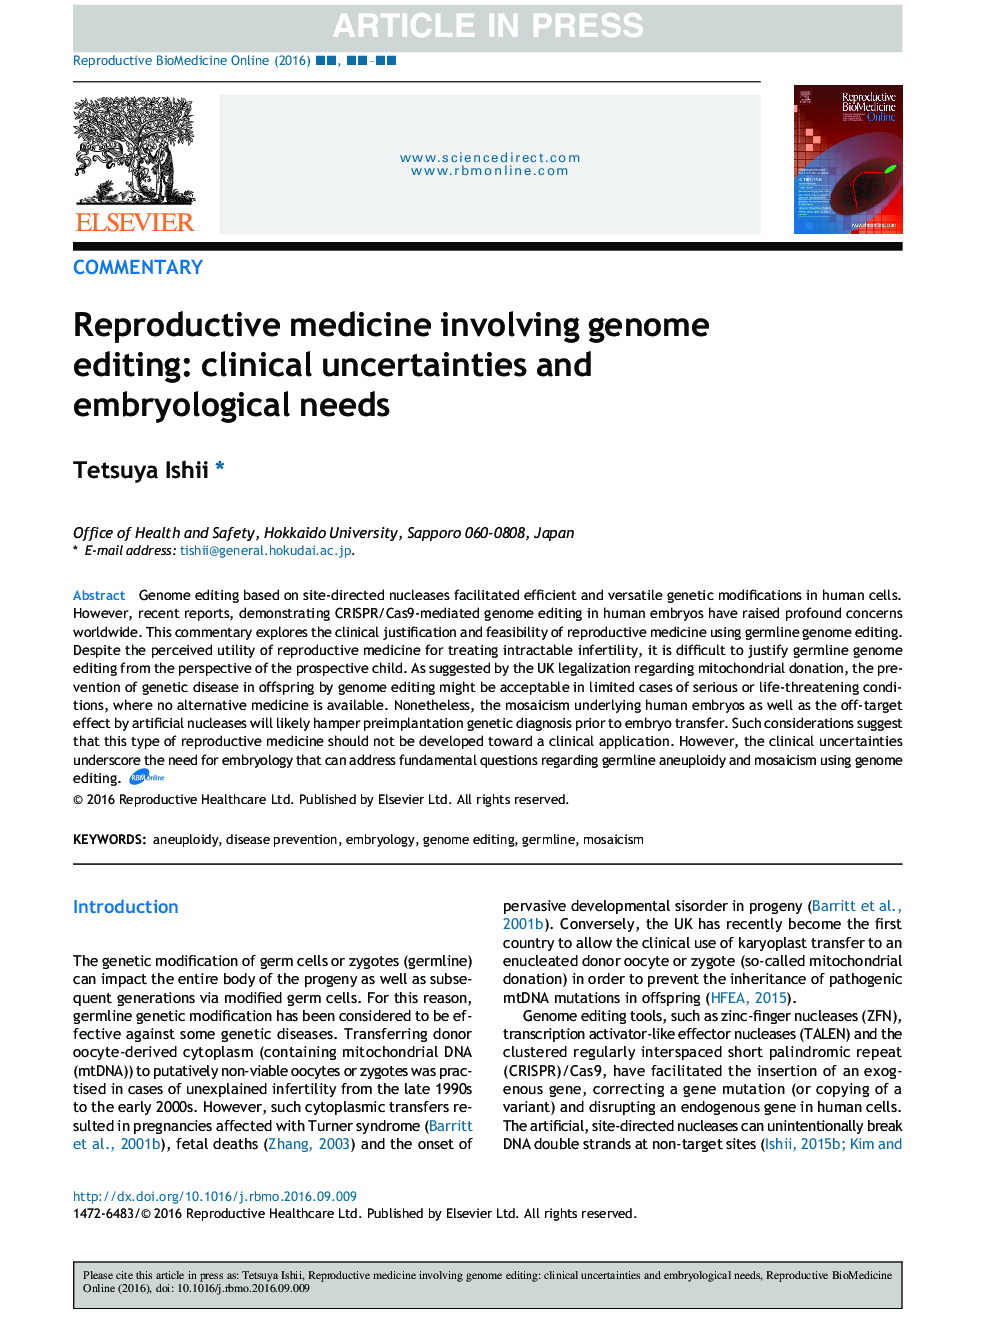 Reproductive medicine involving genome editing: clinical uncertainties and embryological needs